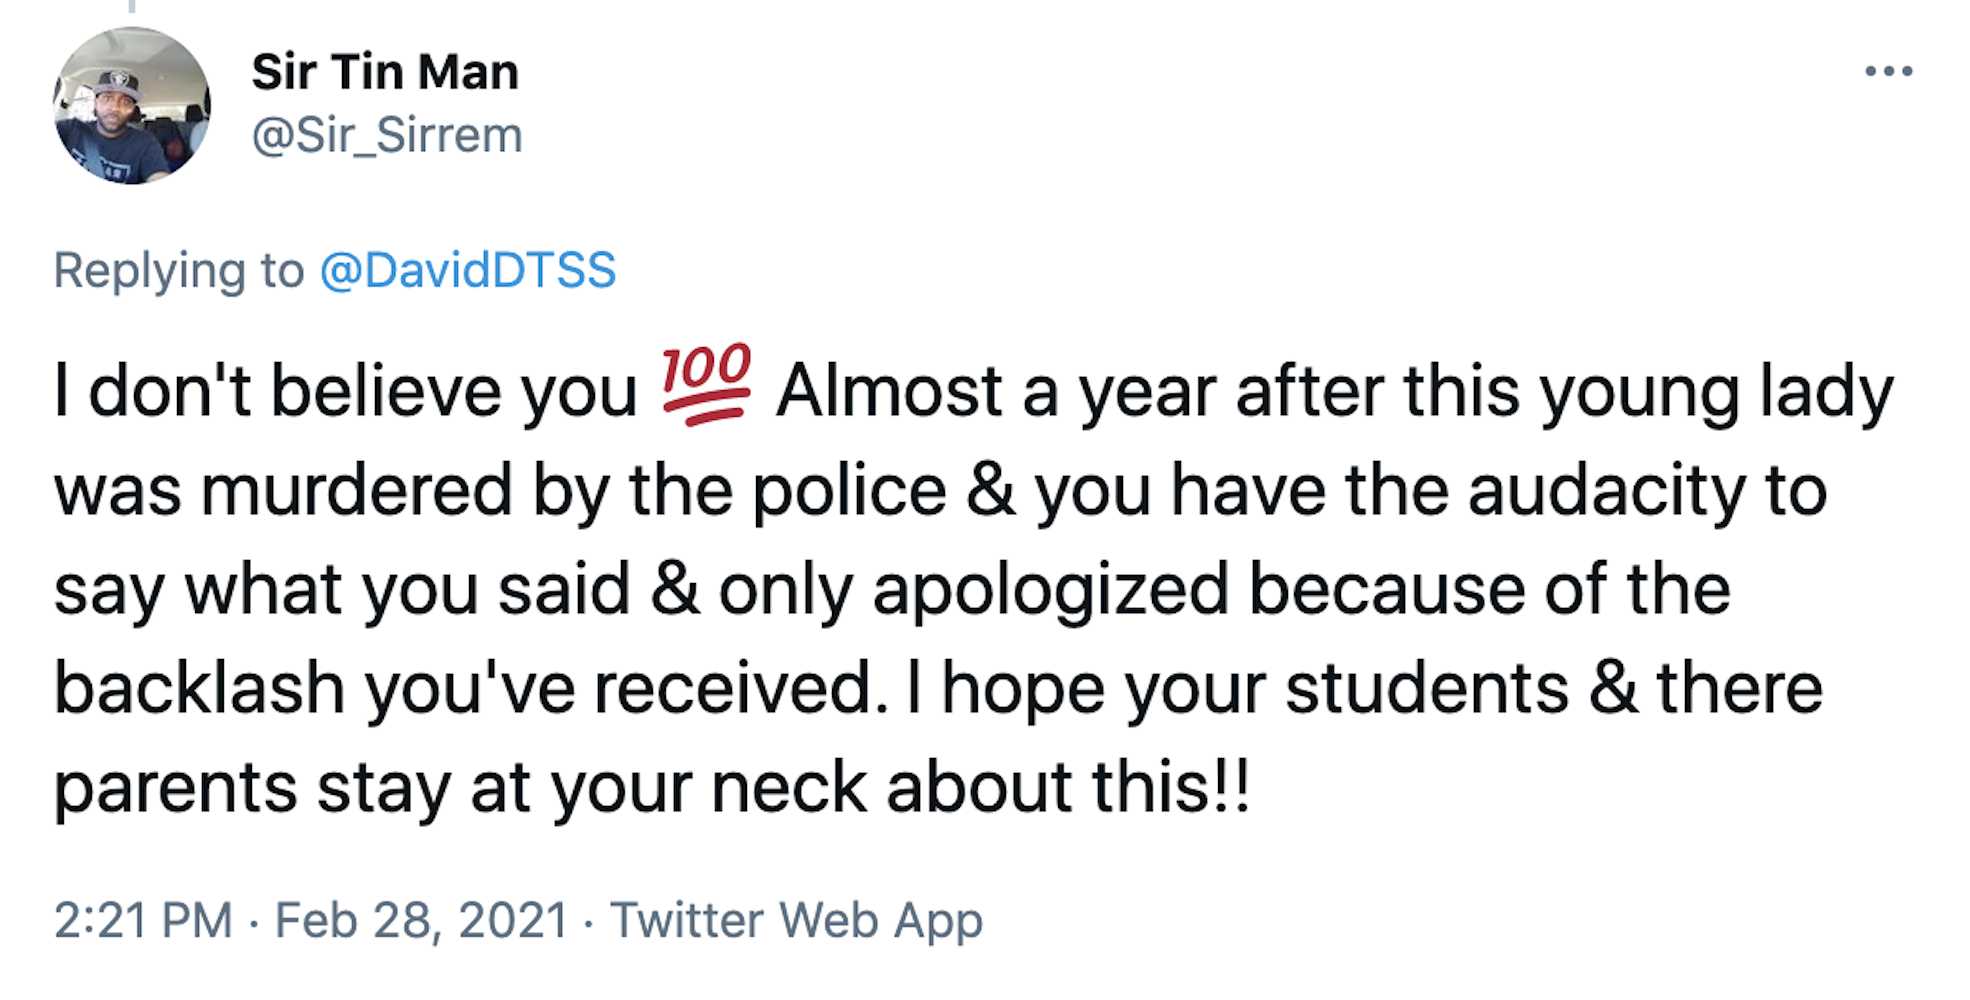 I don't believe you 💯 Almost a year after this young lady was murdered by the police & you have the audacity to say what you said & only apologized because of the backlash you've received. I hope your students & there parents stay at your neck about this!!